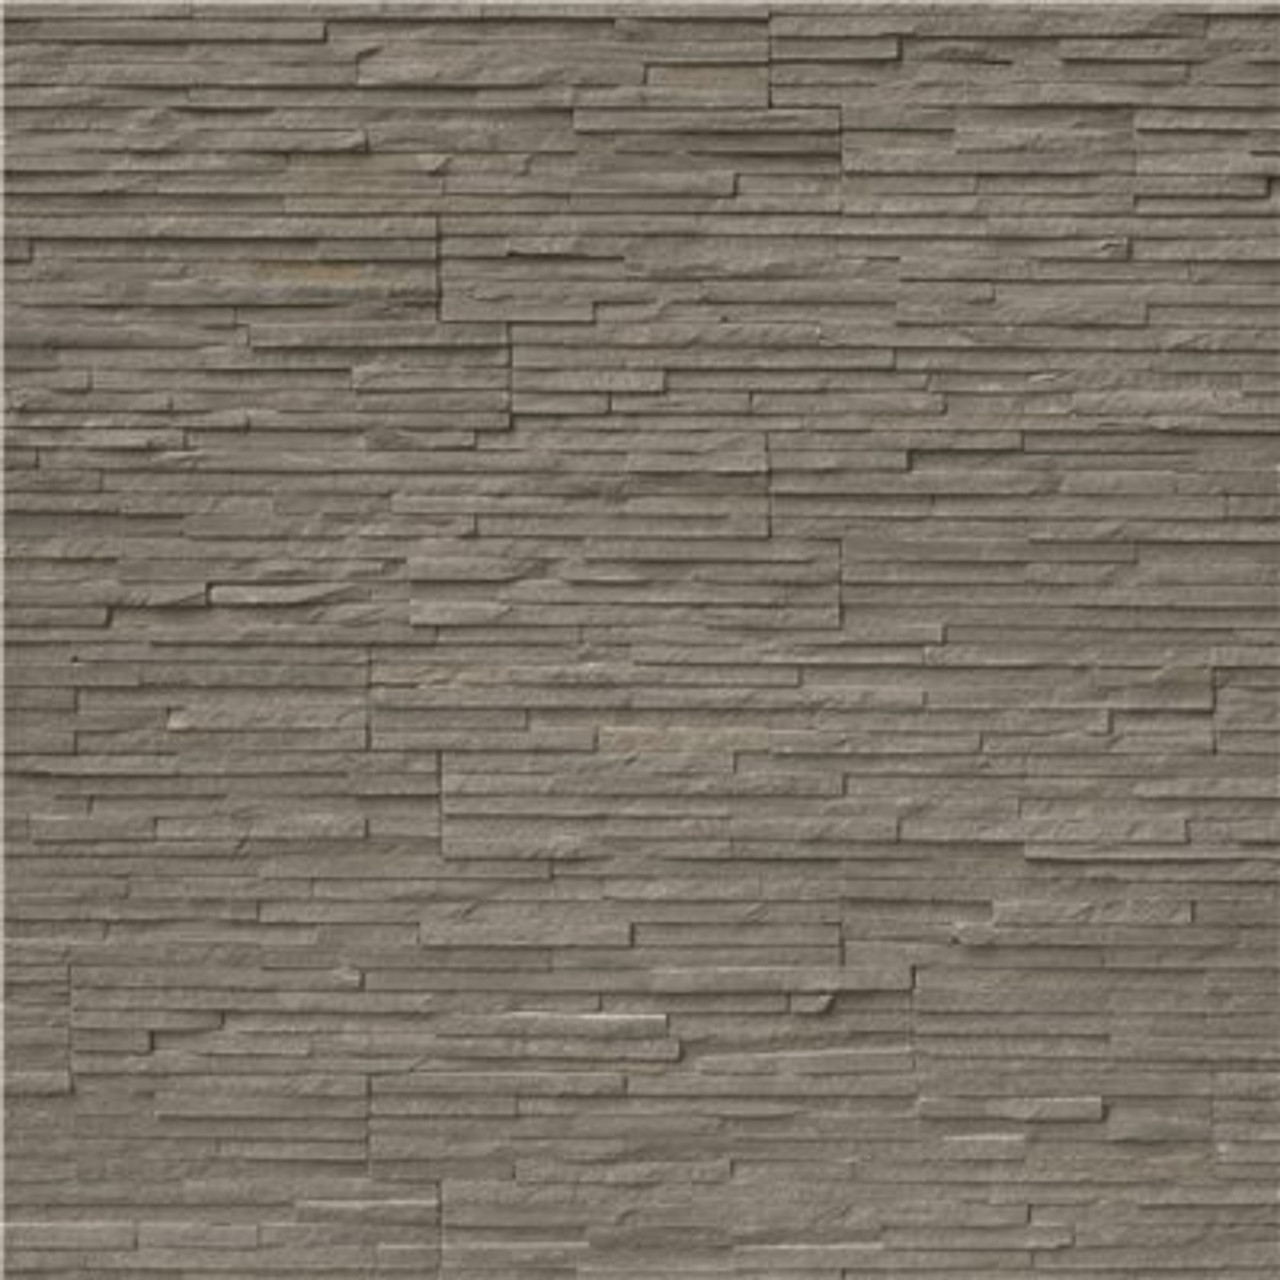 Msi Charcoal Pencil Ledger Panel 6 In. X 24 In. Slate Wall Tile (10 Cases / 80 Sq. Ft. / Pallet)